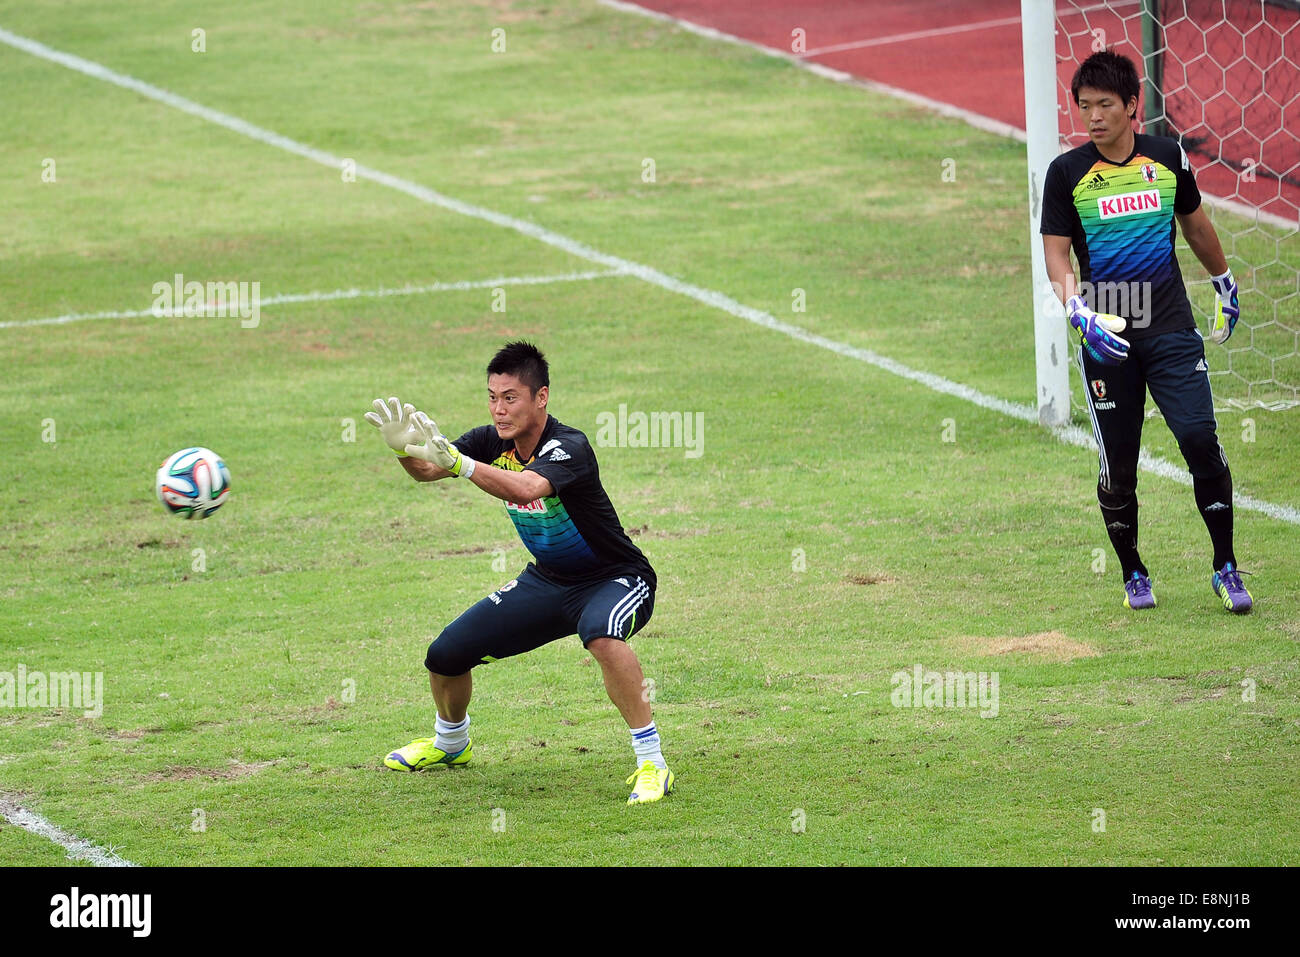 Singapore. 12th Oct, 2014. Kawashima Eiji (L) of Japan's football team attends the training session at Singapore's Bishan Stadium in Singapore, on Oct. 12, 2014. Japan and Brazil will have a friendly game at Singapore's National Stadium on Oct. 14. © Then Chih Wey/Xinhua/Alamy Live News Stock Photo